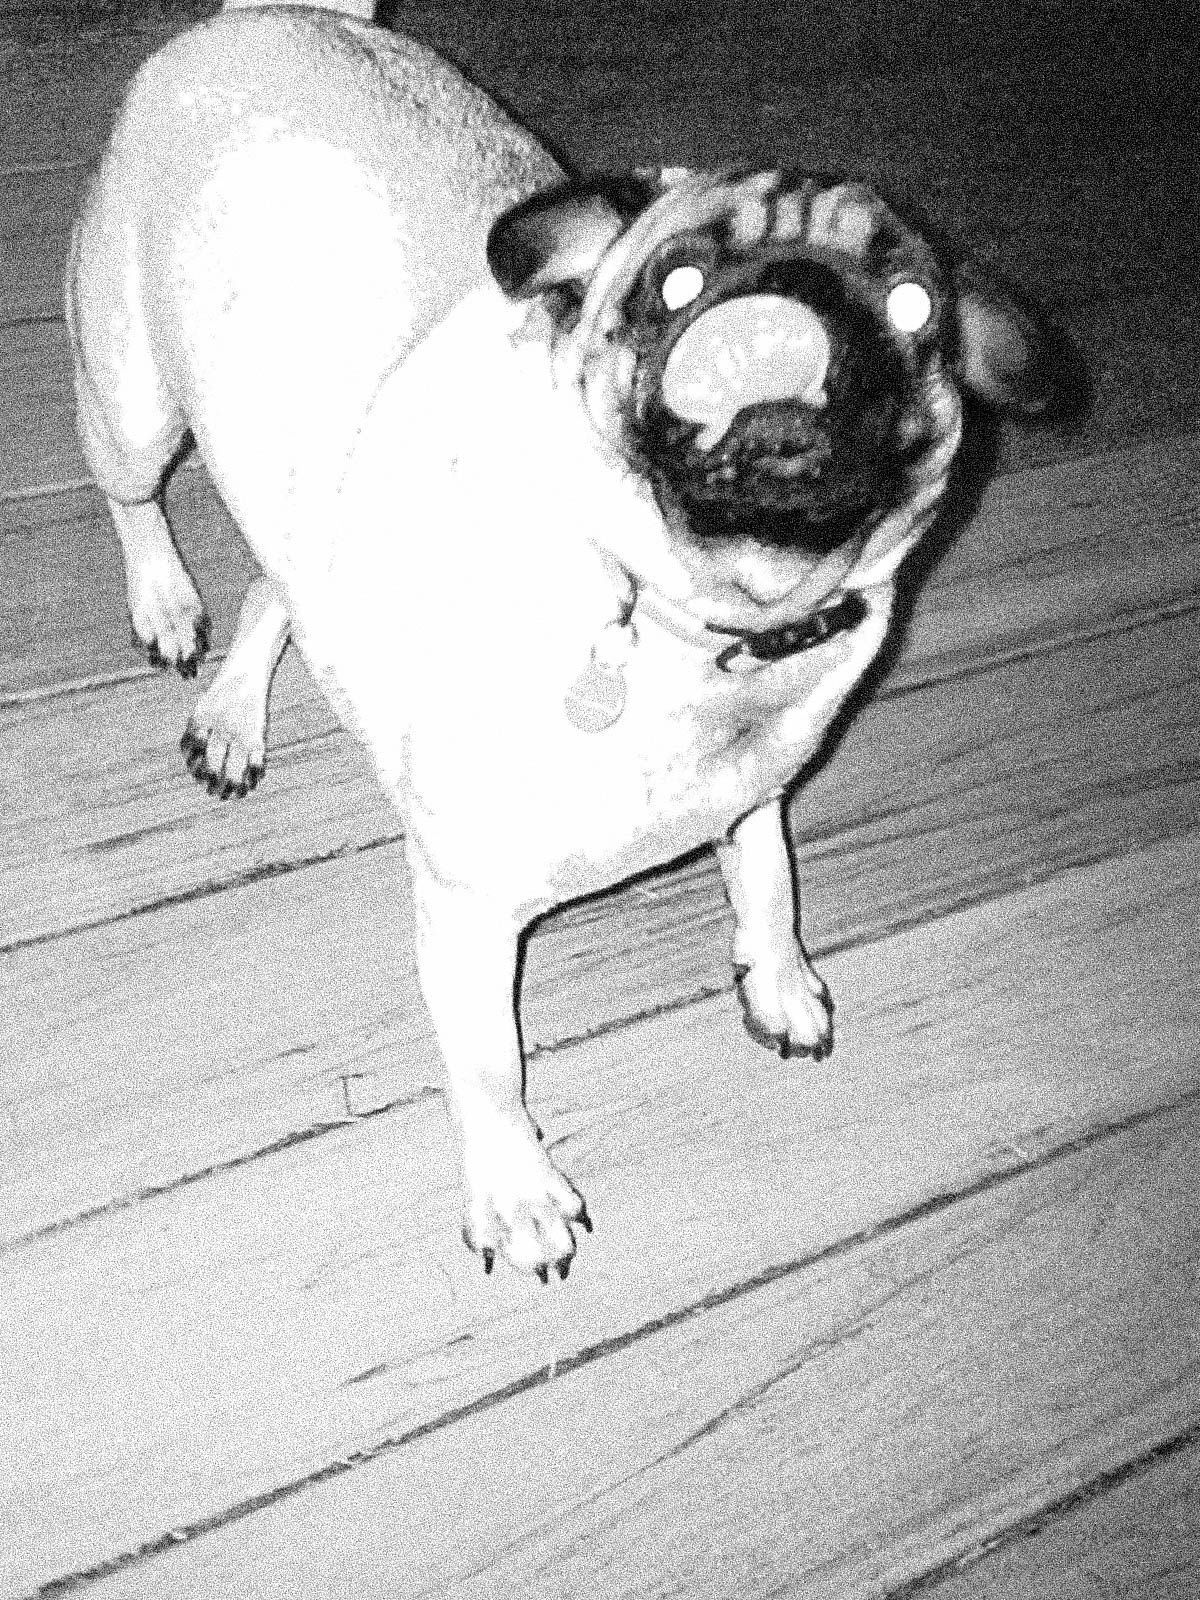 A grainy black-and-white photo of a pug dog standing on a wooden floor with glowing eyes.